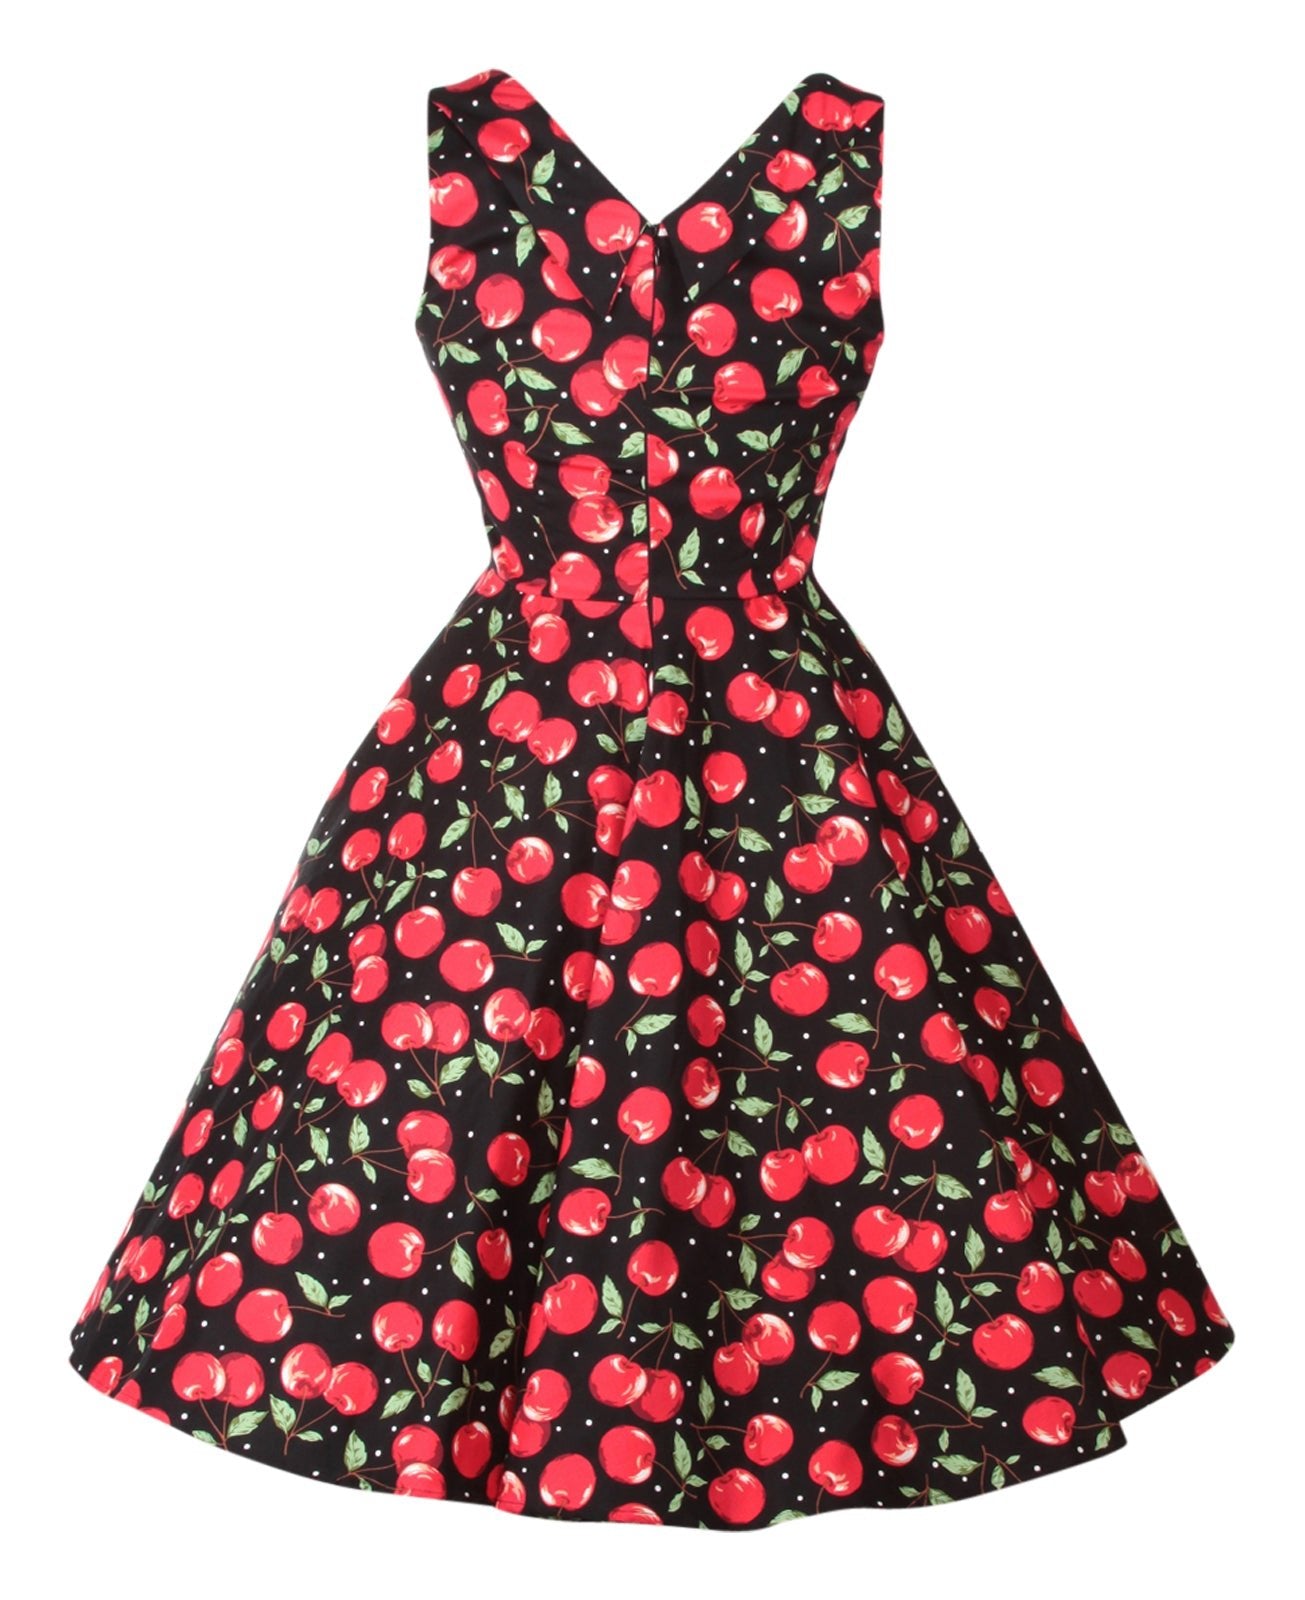 Our Grace ruffled bust dress, in black/red cherry print, back view